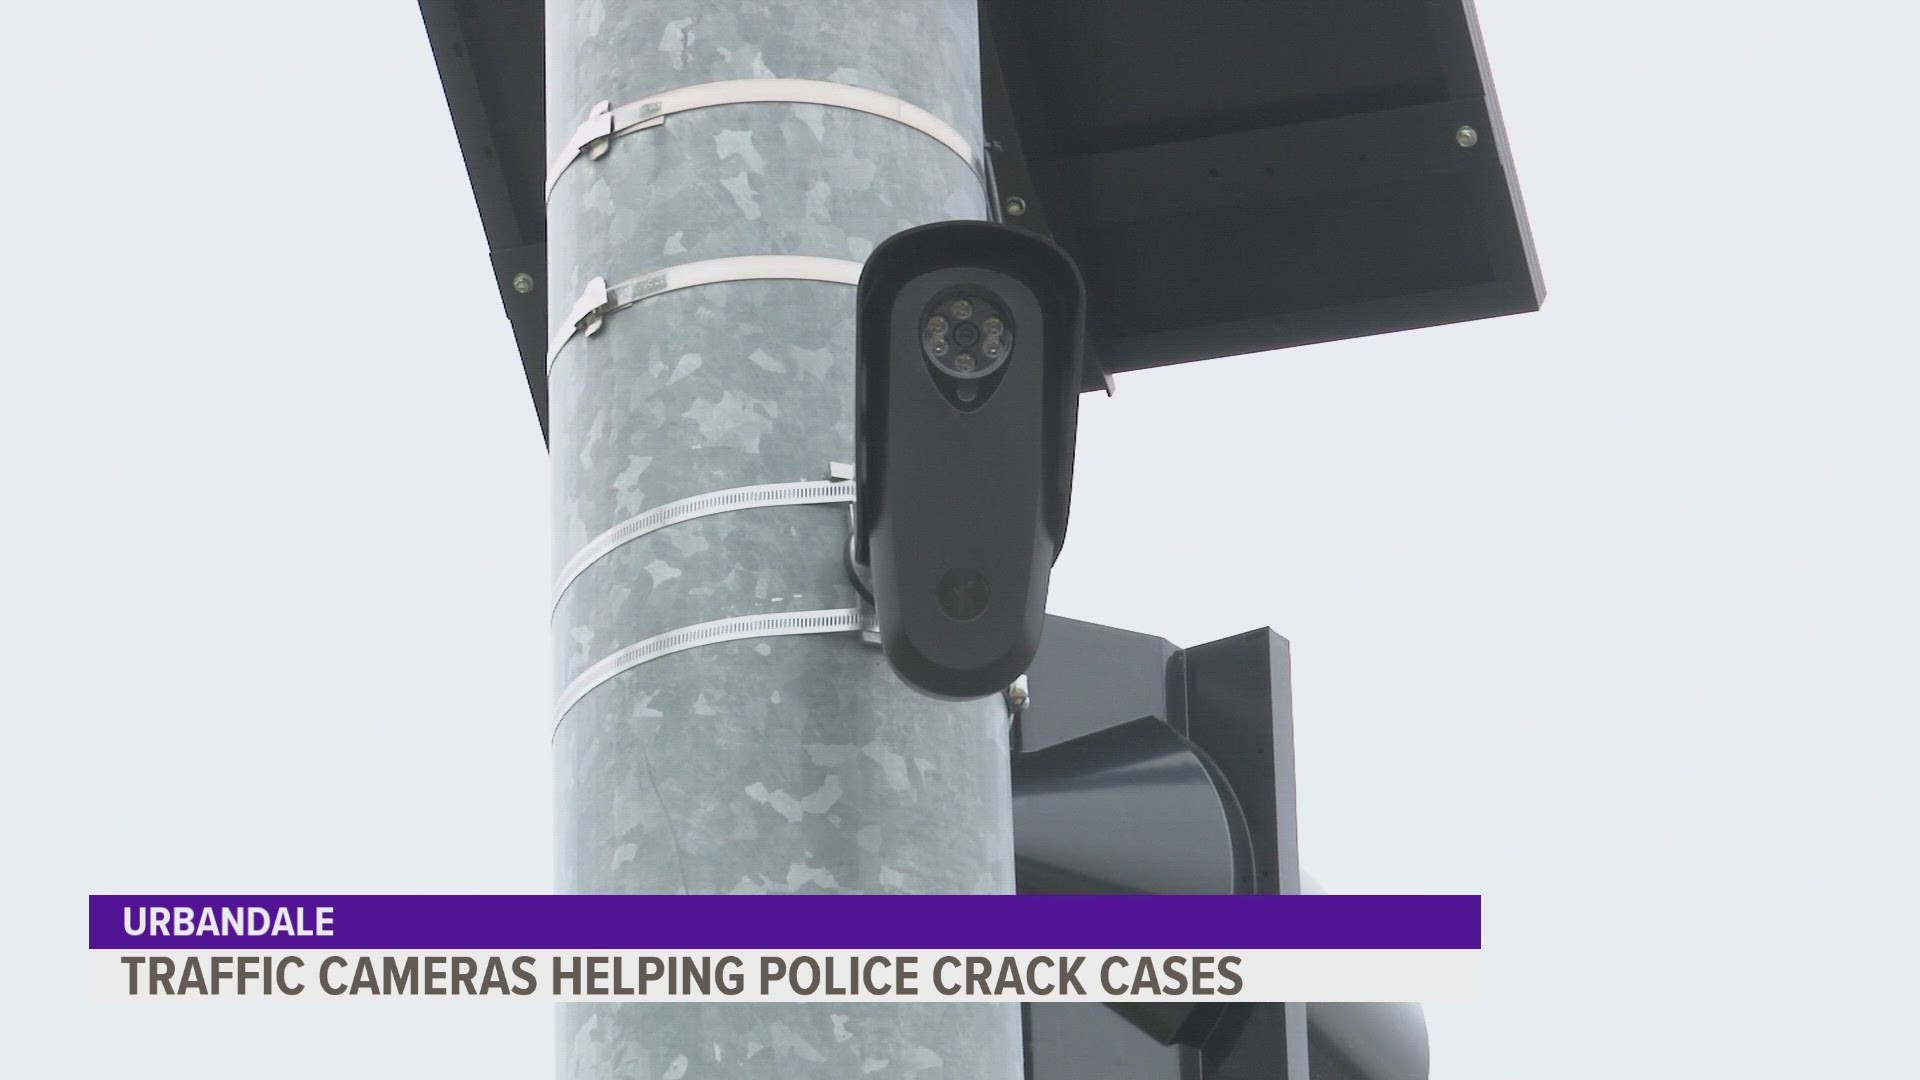 Officers told Local 5 the cameras have helped serve nearly 60 arrest warrants, find 14 stolen vehicles and locate at least one lost child since installation.